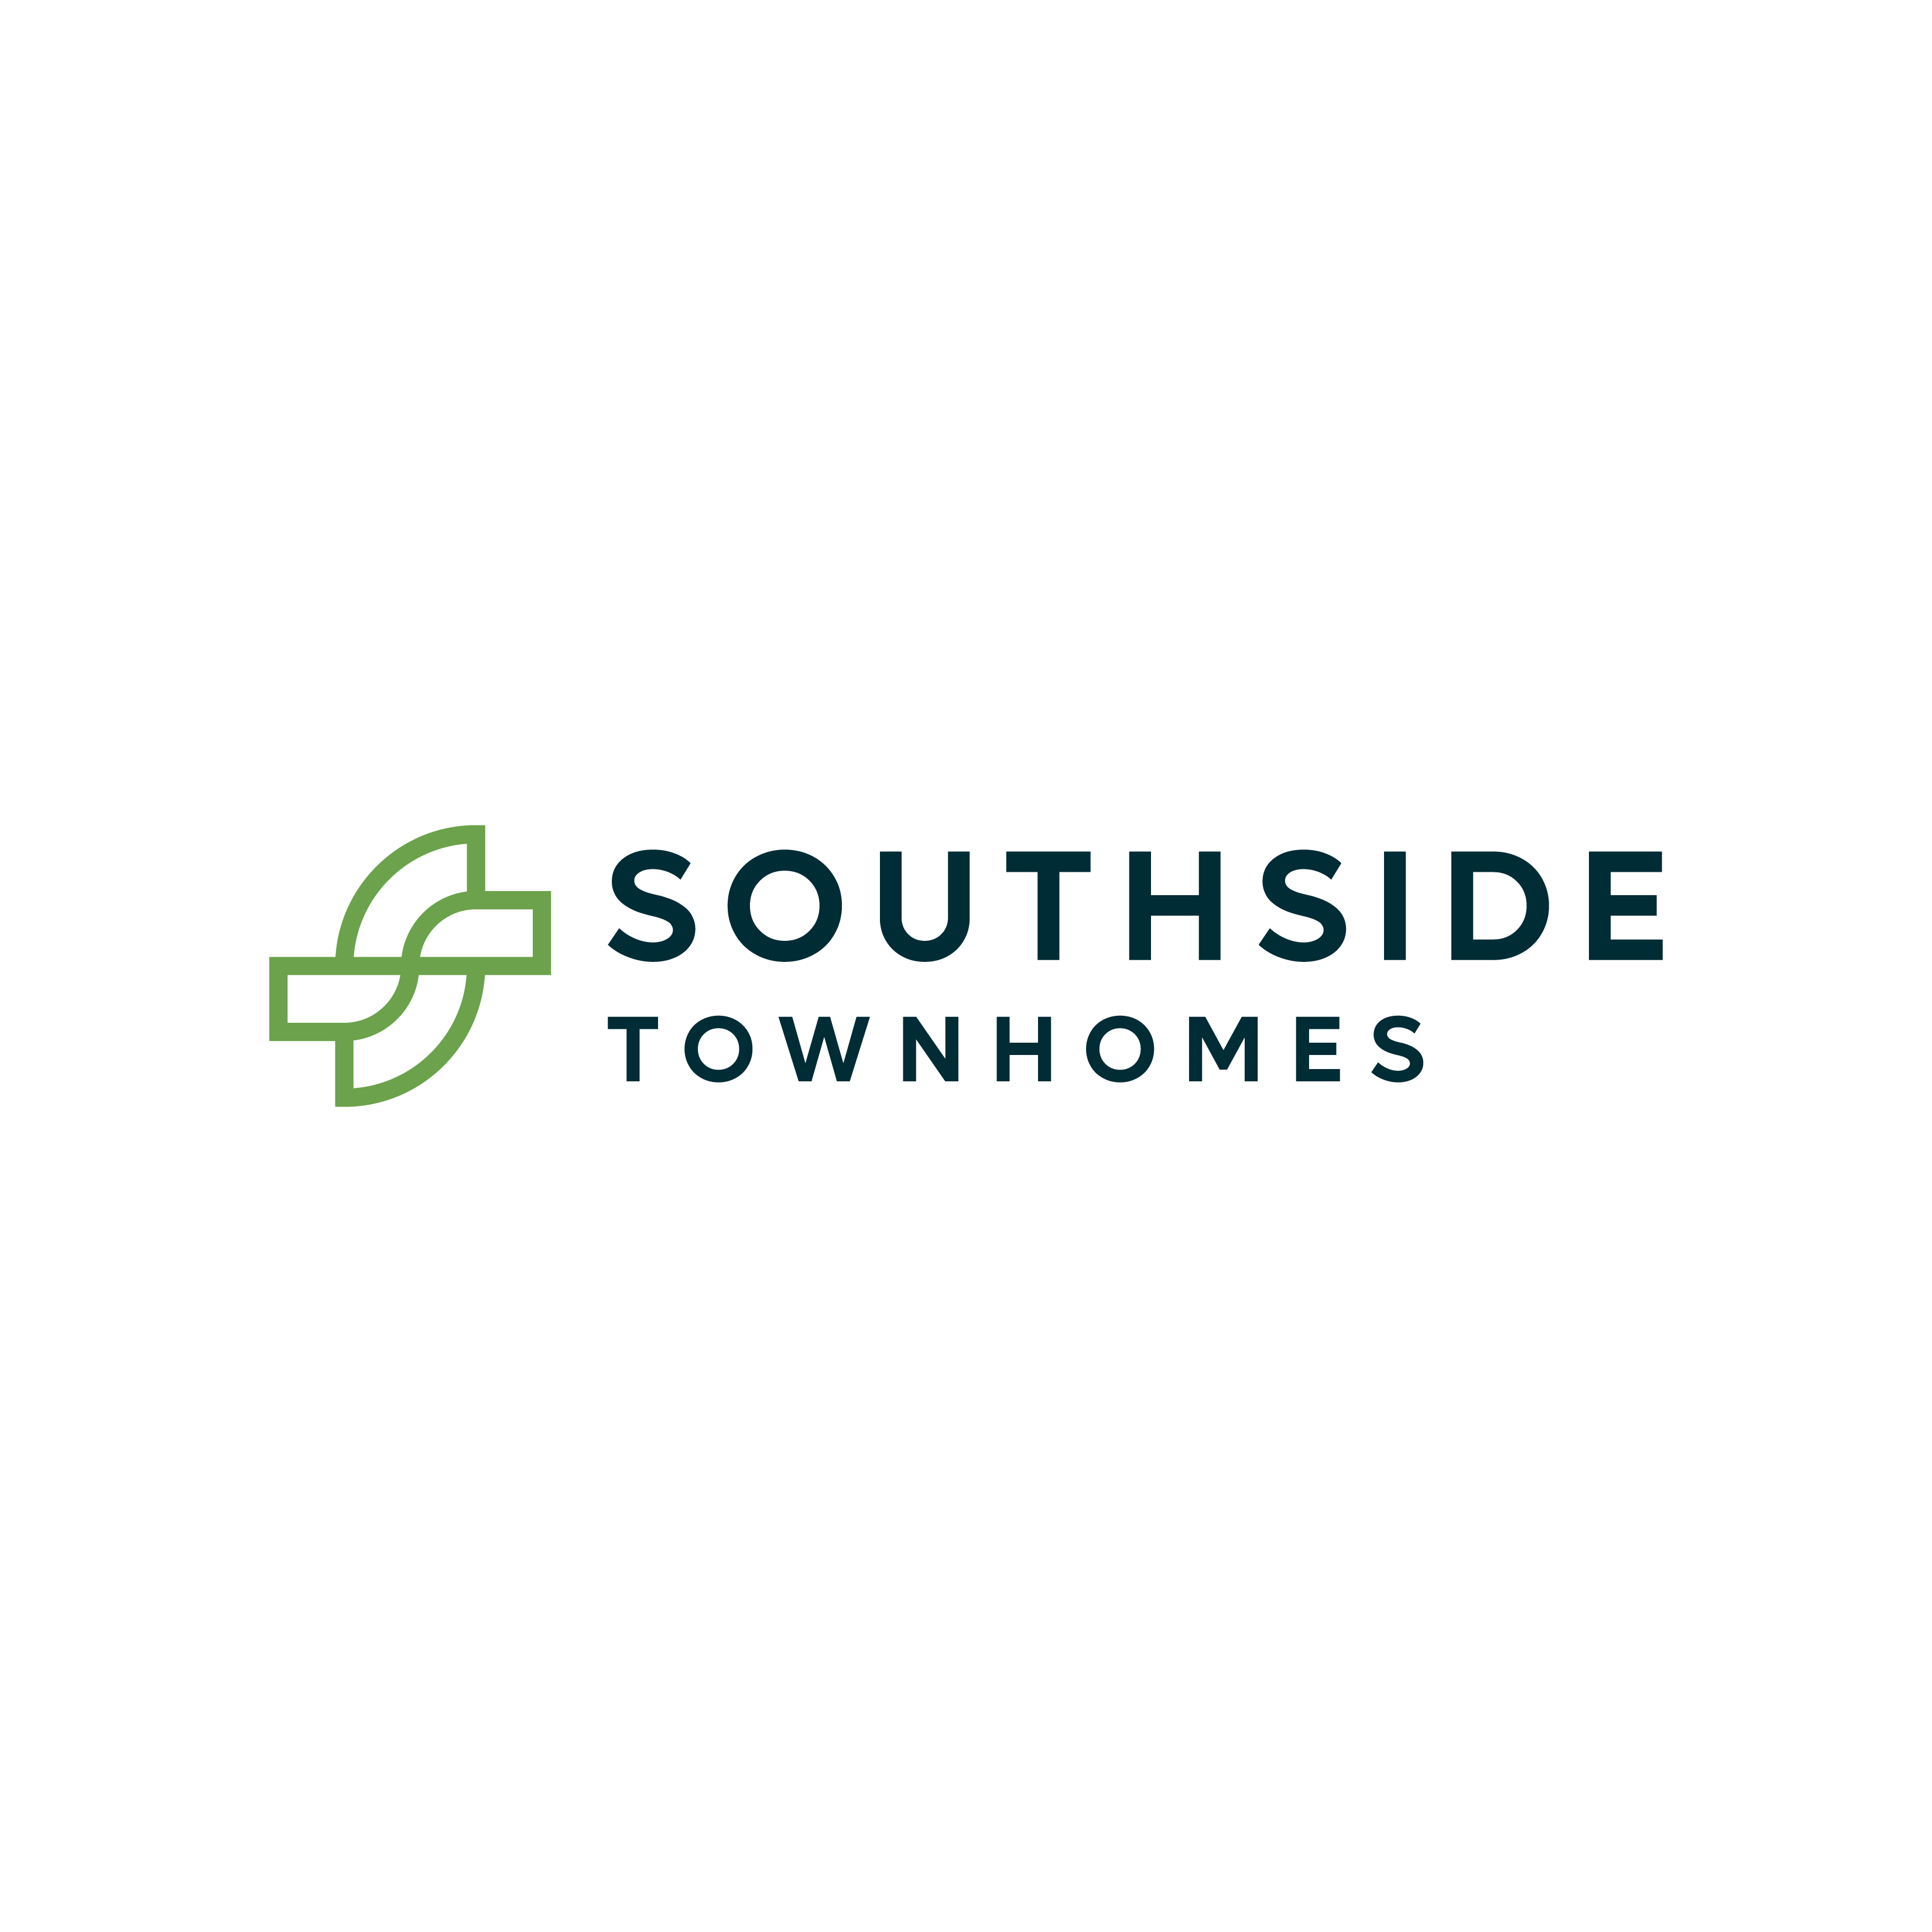 Southside Townhomes - Nampa, ID 83686 - (208)606-3119 | ShowMeLocal.com